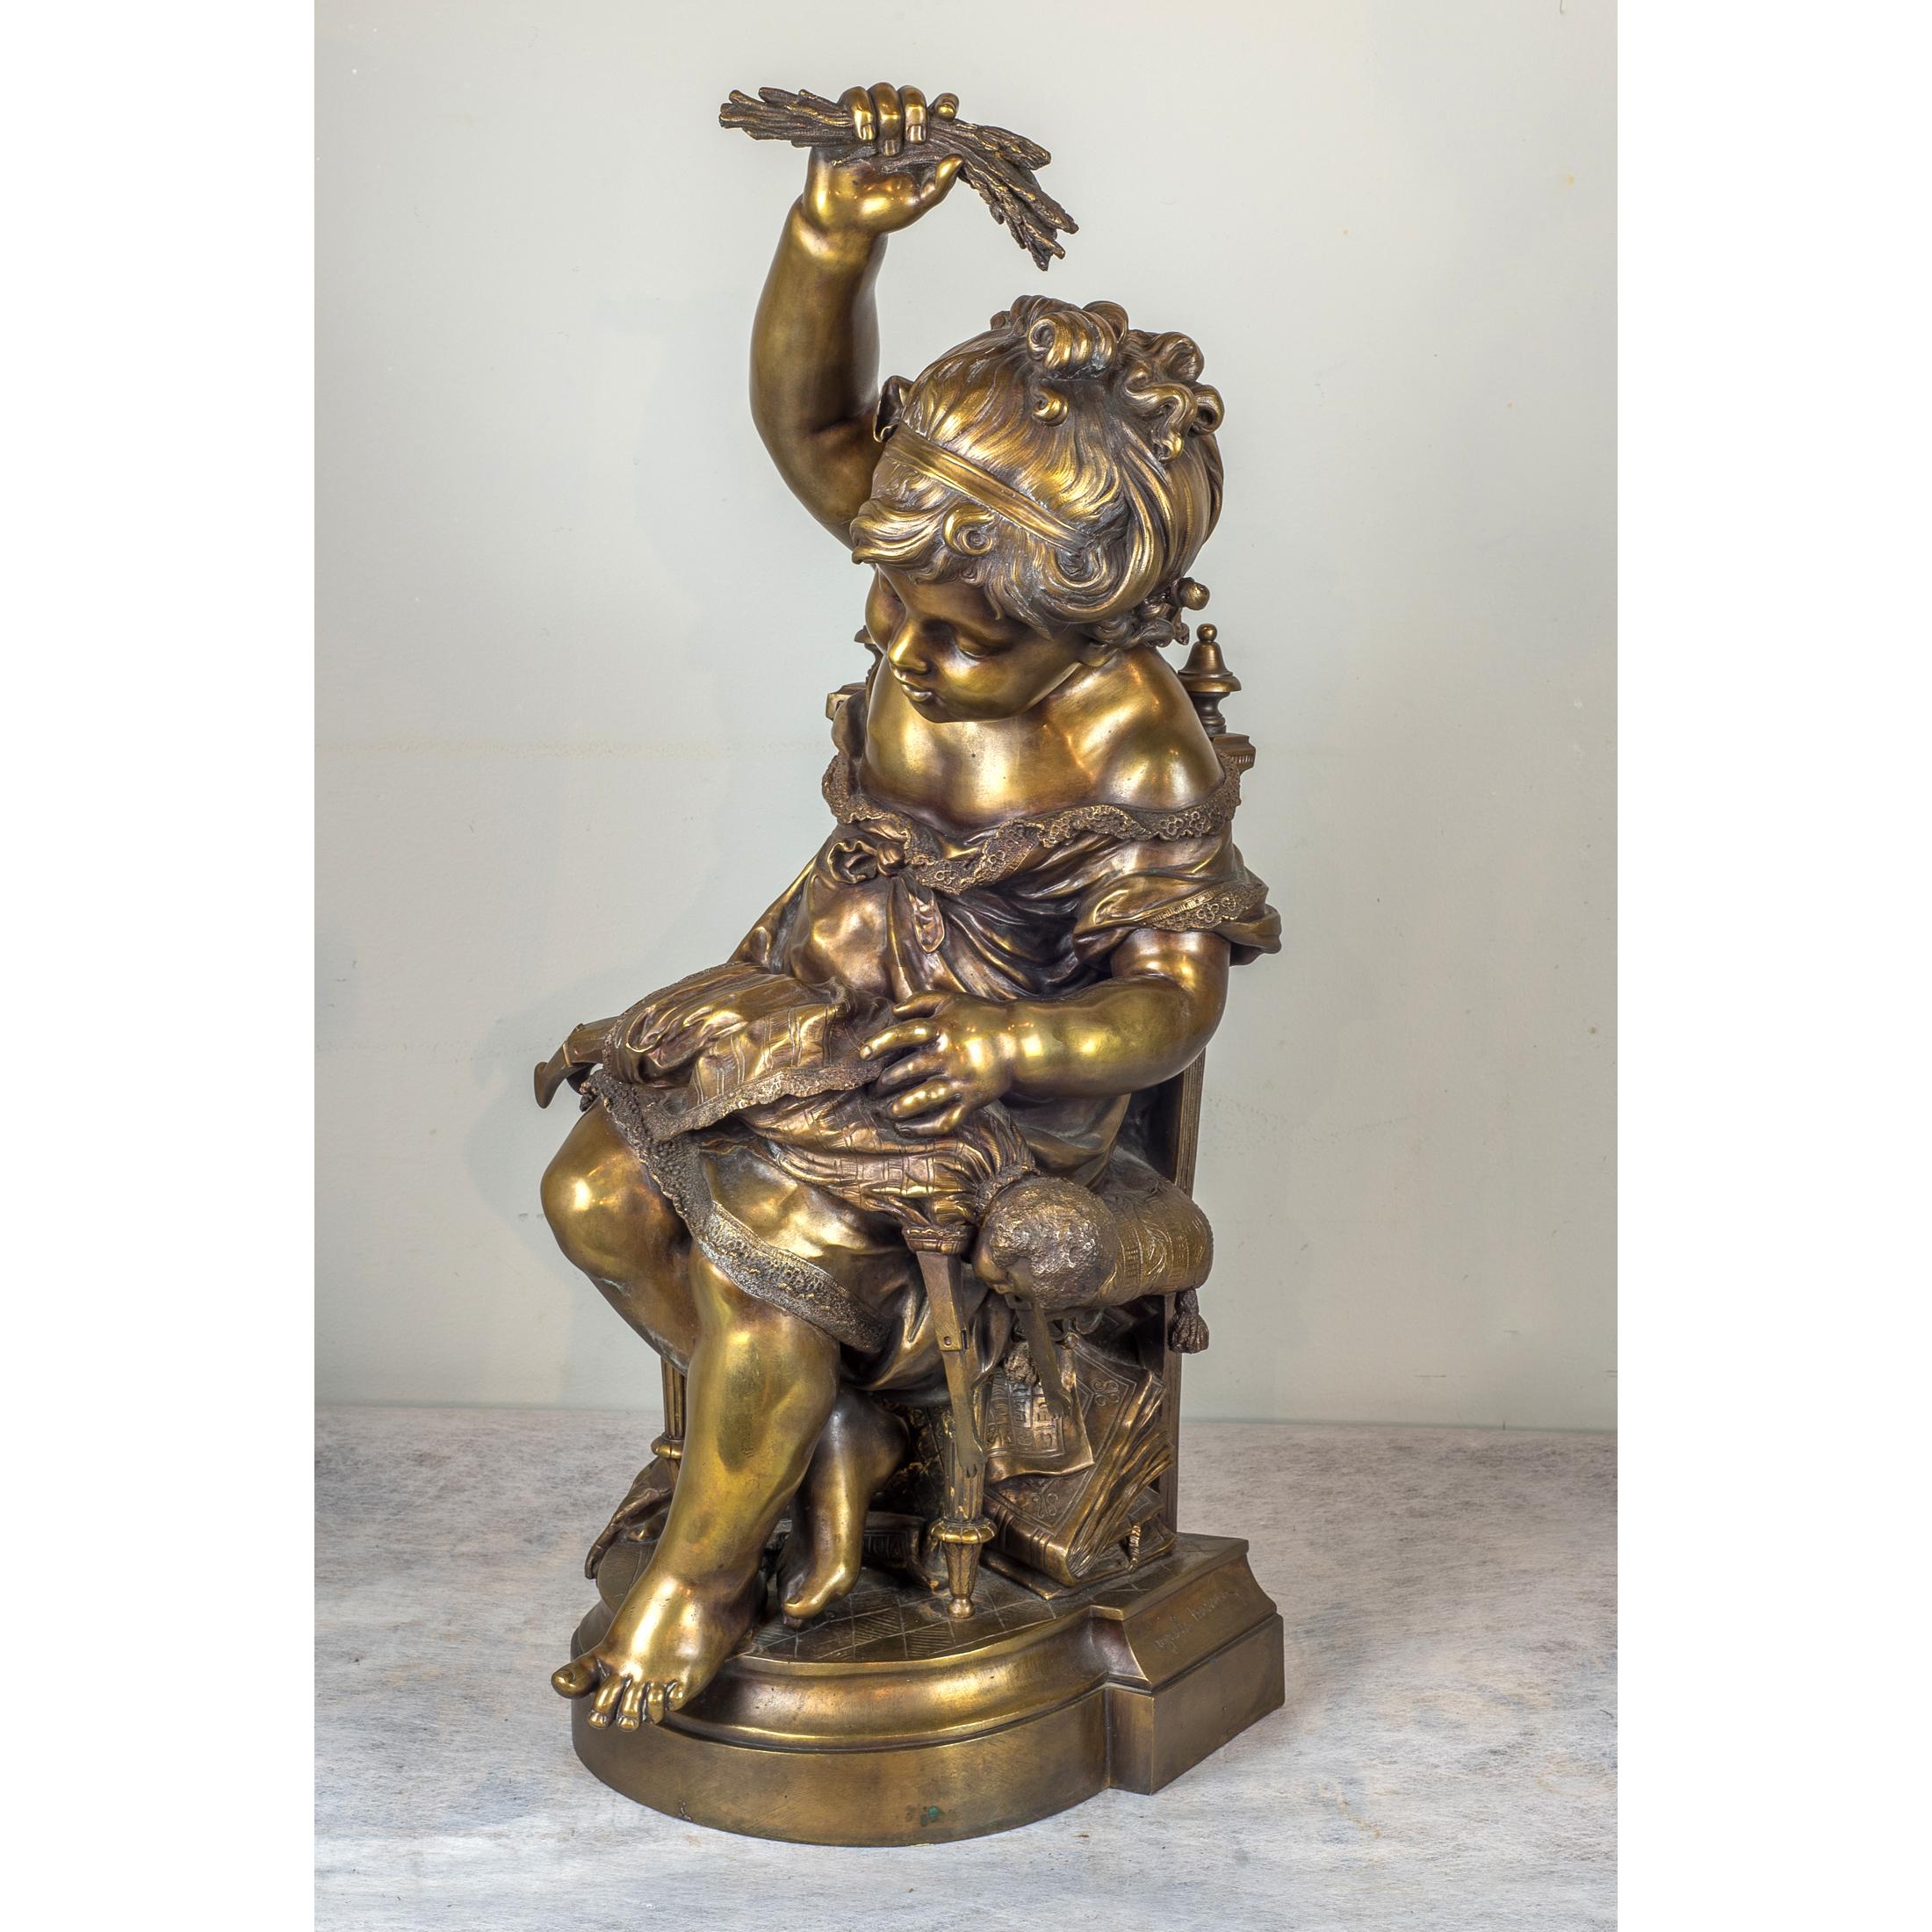 A fine patinated bronze sculpture of a seated girl spanking her doll. Signed ‘Auguste Moreau’ on base.

Artist: Auguste Moreau (French, 1834-1917)
Date: 19th century
Dimension: 24 1/2 in. x 11 in. x 11 in.